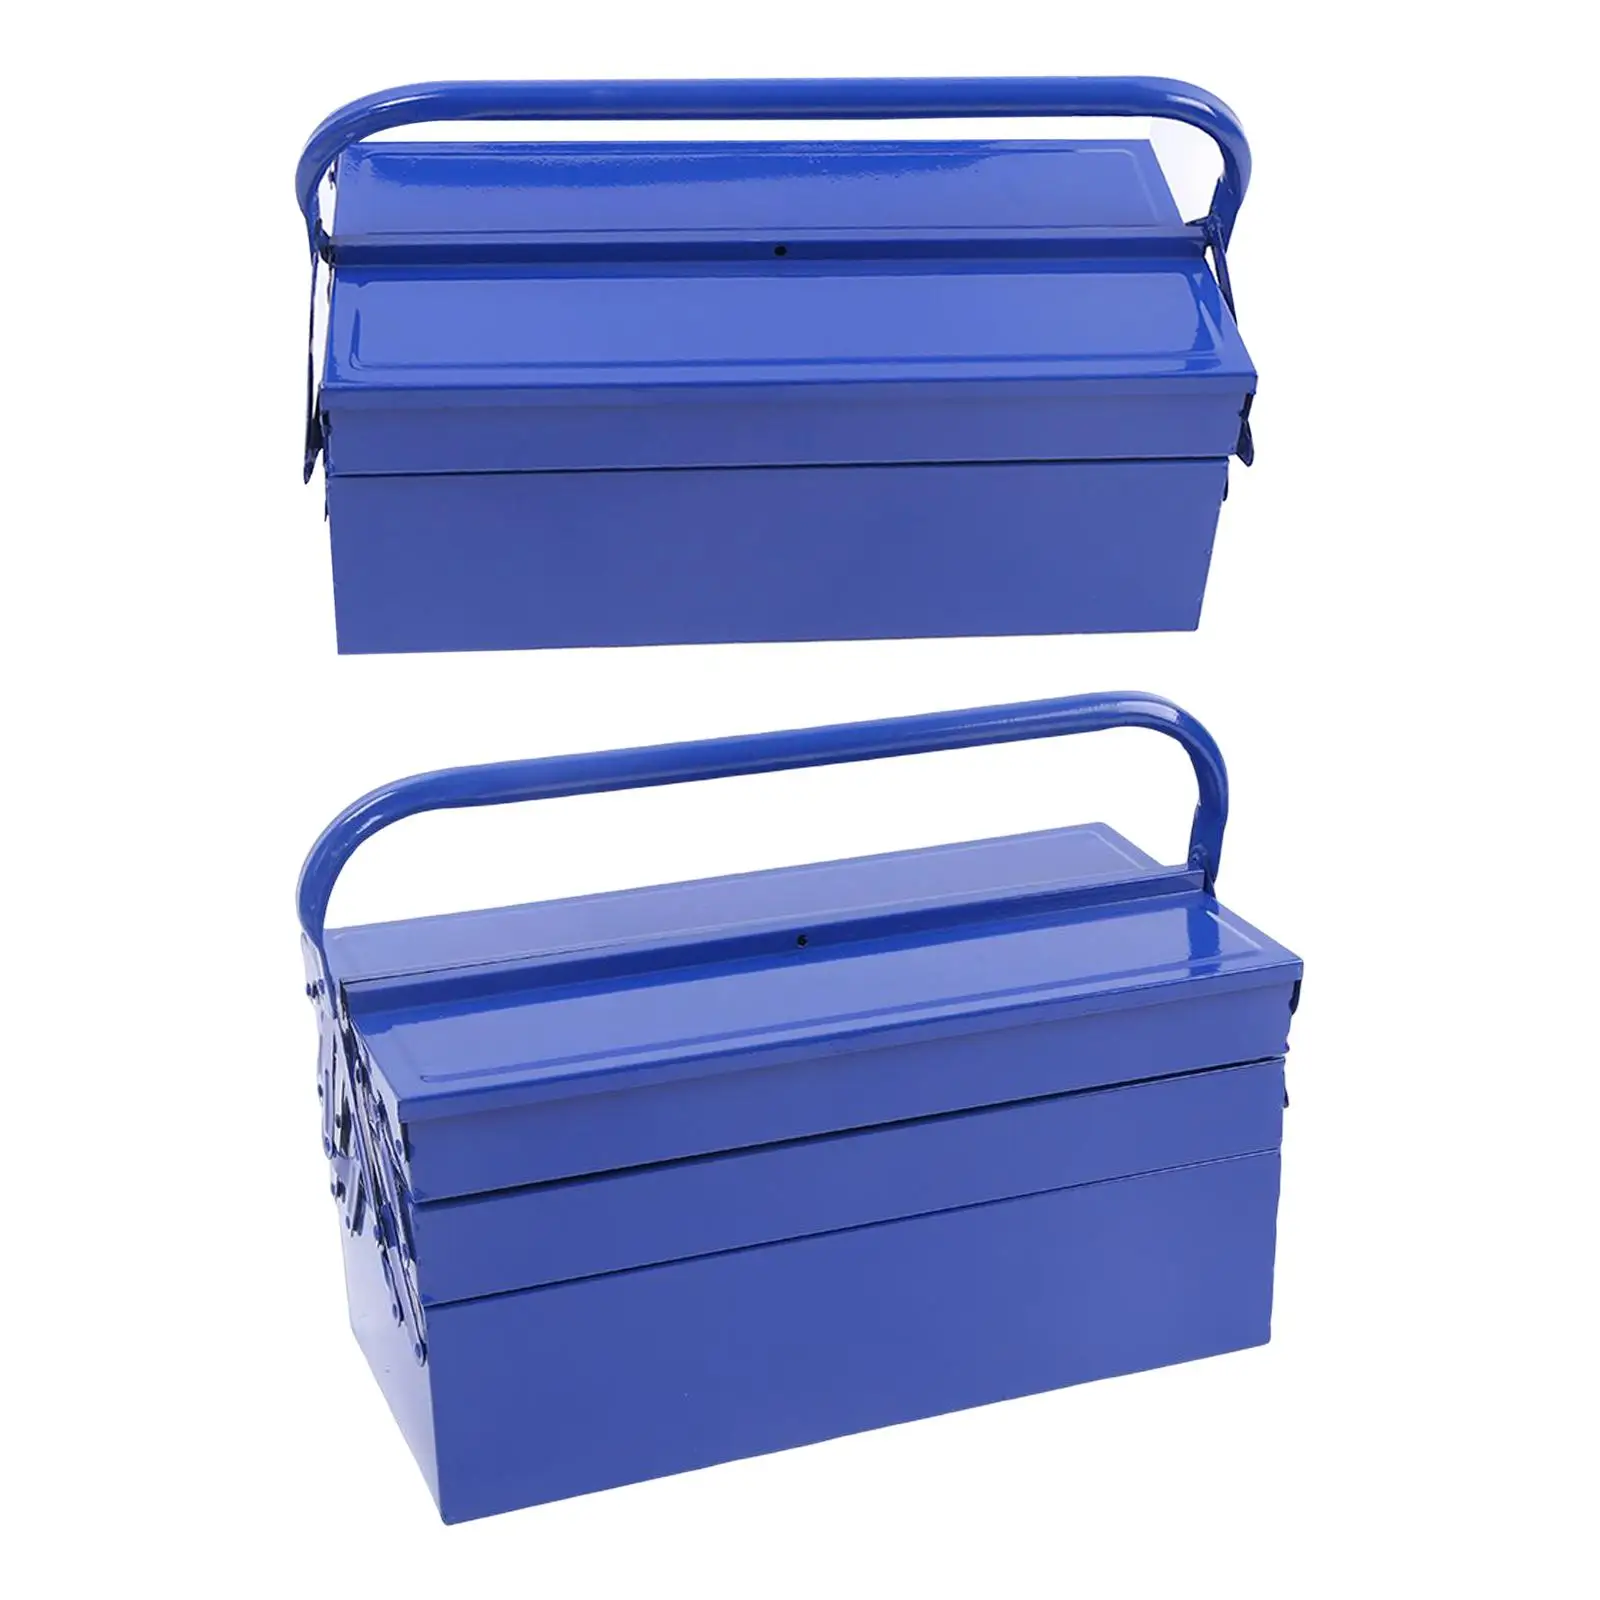 Portable Tool Box Durable with Handle Screw and Nuts Compartment Tray Drawer Repair Tool Storage Case for Garage Trunk